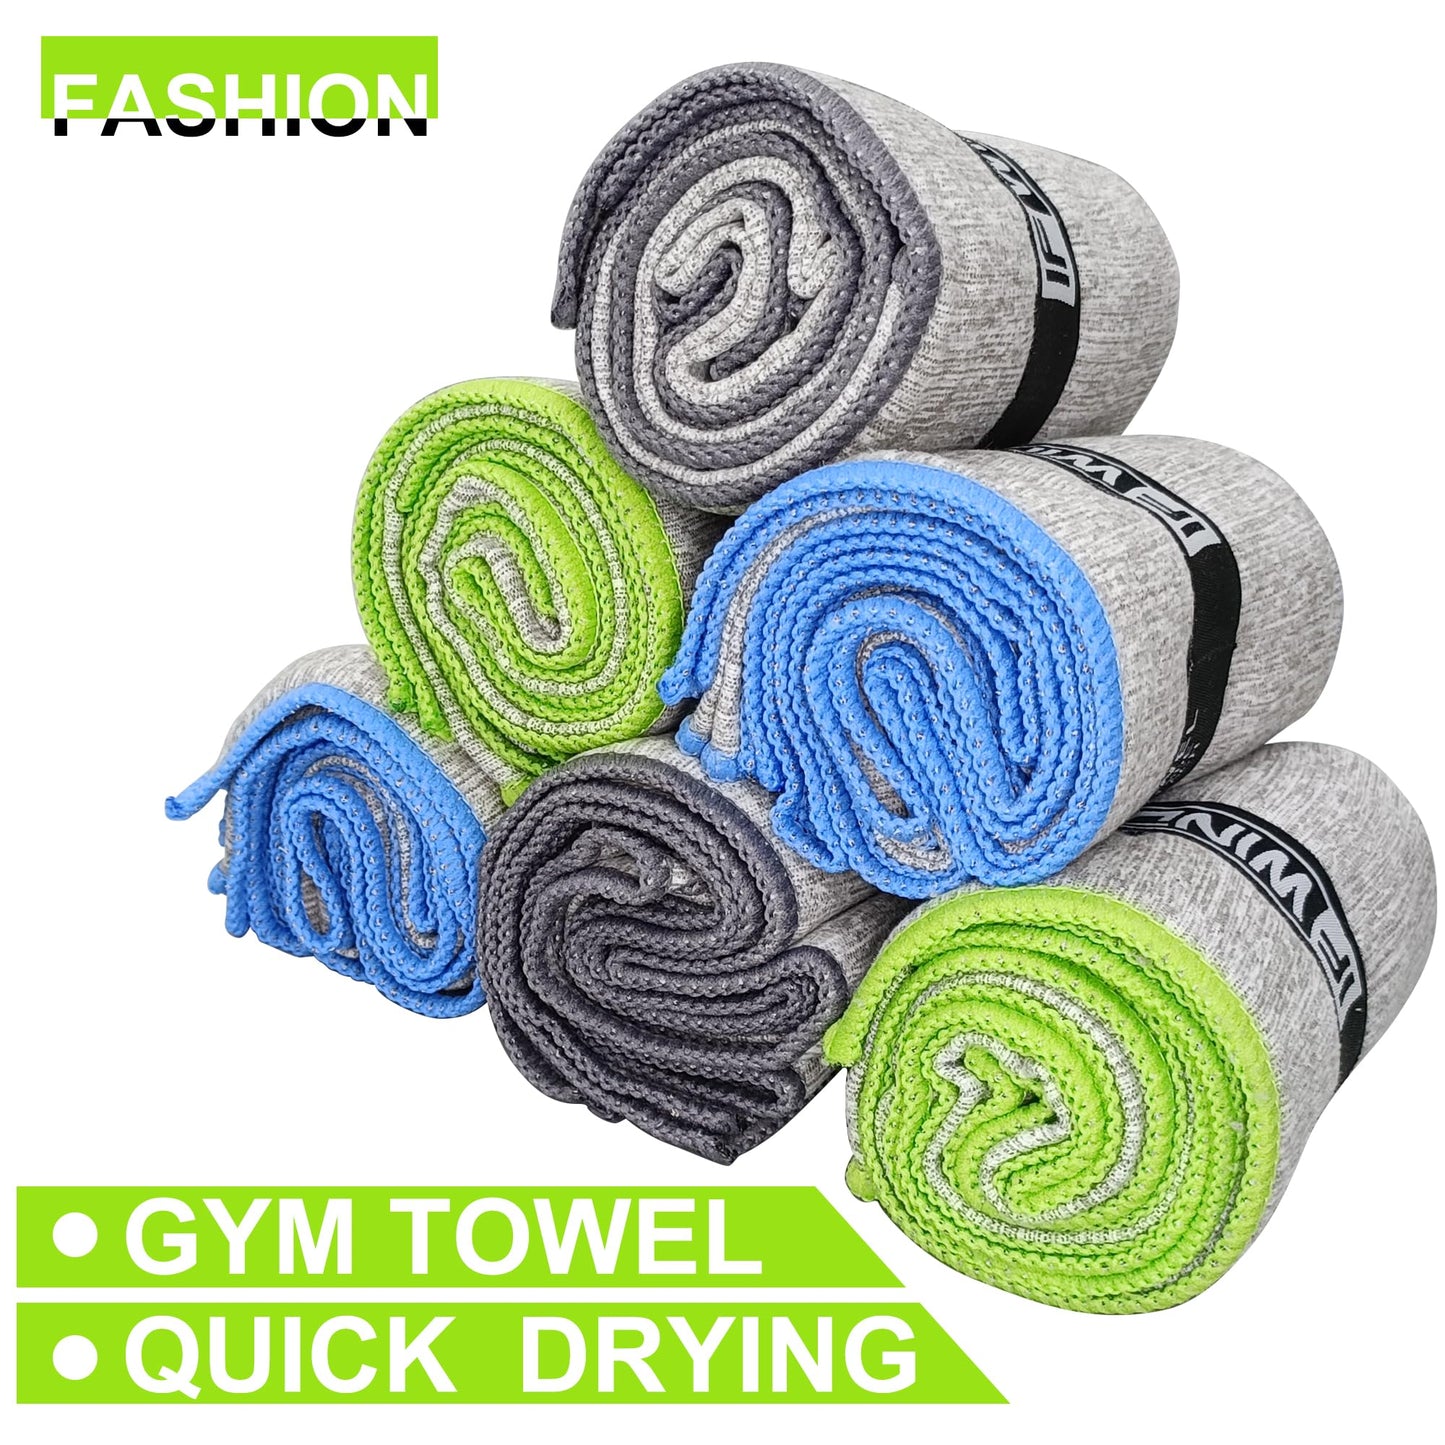 IFWIND 6 Pack Microfiber Gym Towels for Working Out，Fast Drying Workout Accessories Sweat Towels for Gym Gear,Gym Towels for Men & Women,Sports Exercise Fitness Gear Tennis Towels for Body Hot Yoga